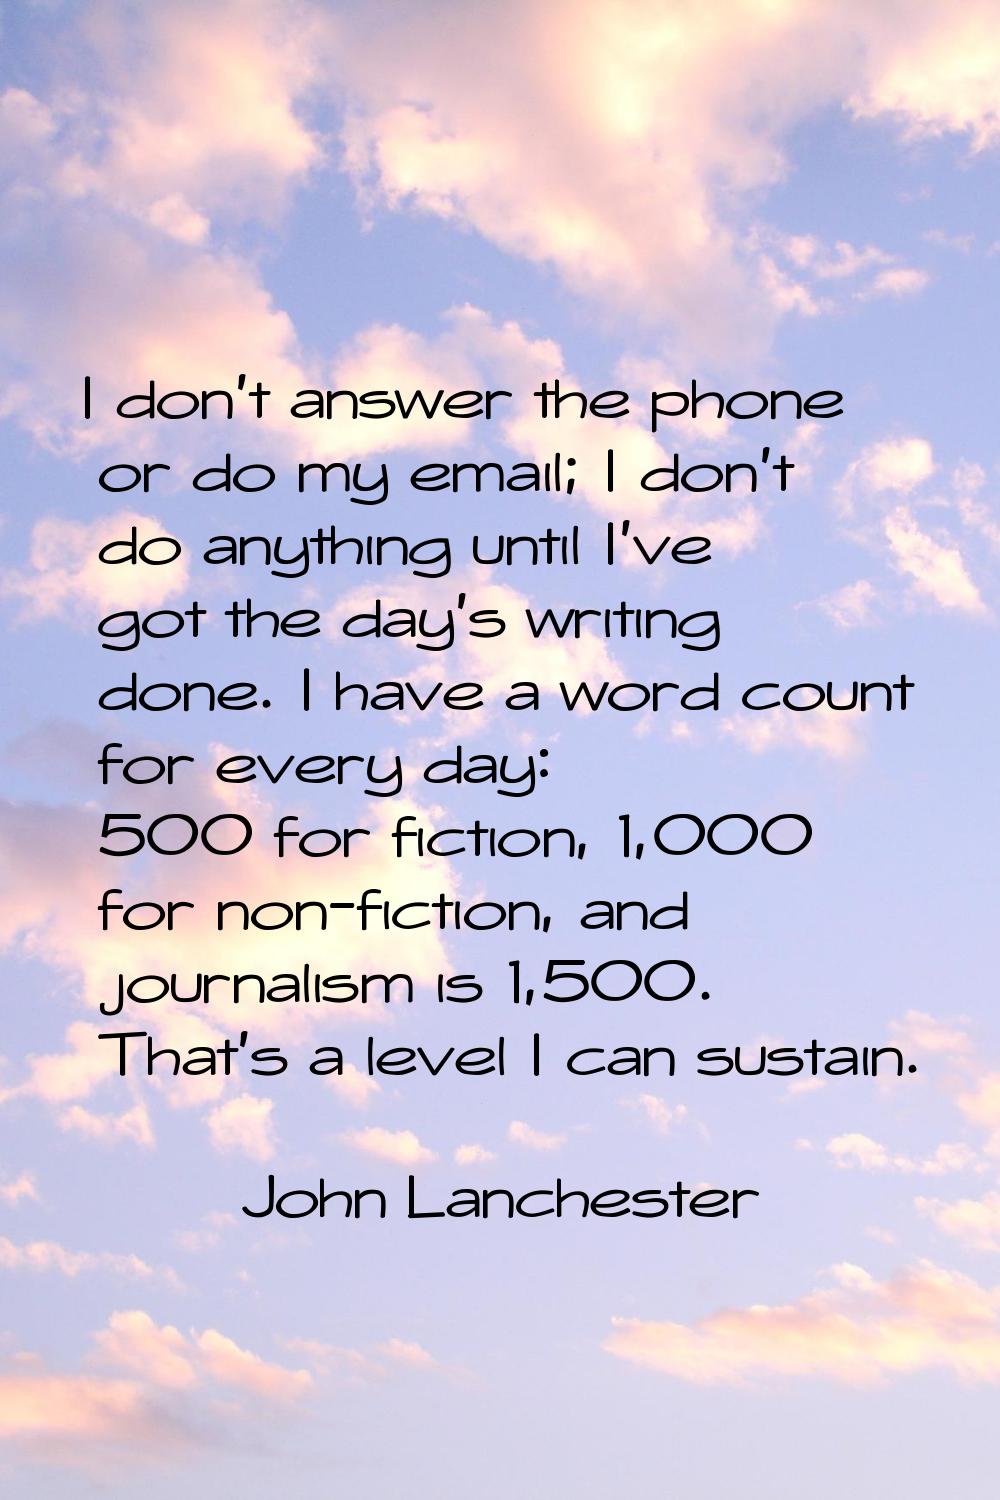 I don't answer the phone or do my email; I don't do anything until I've got the day's writing done.